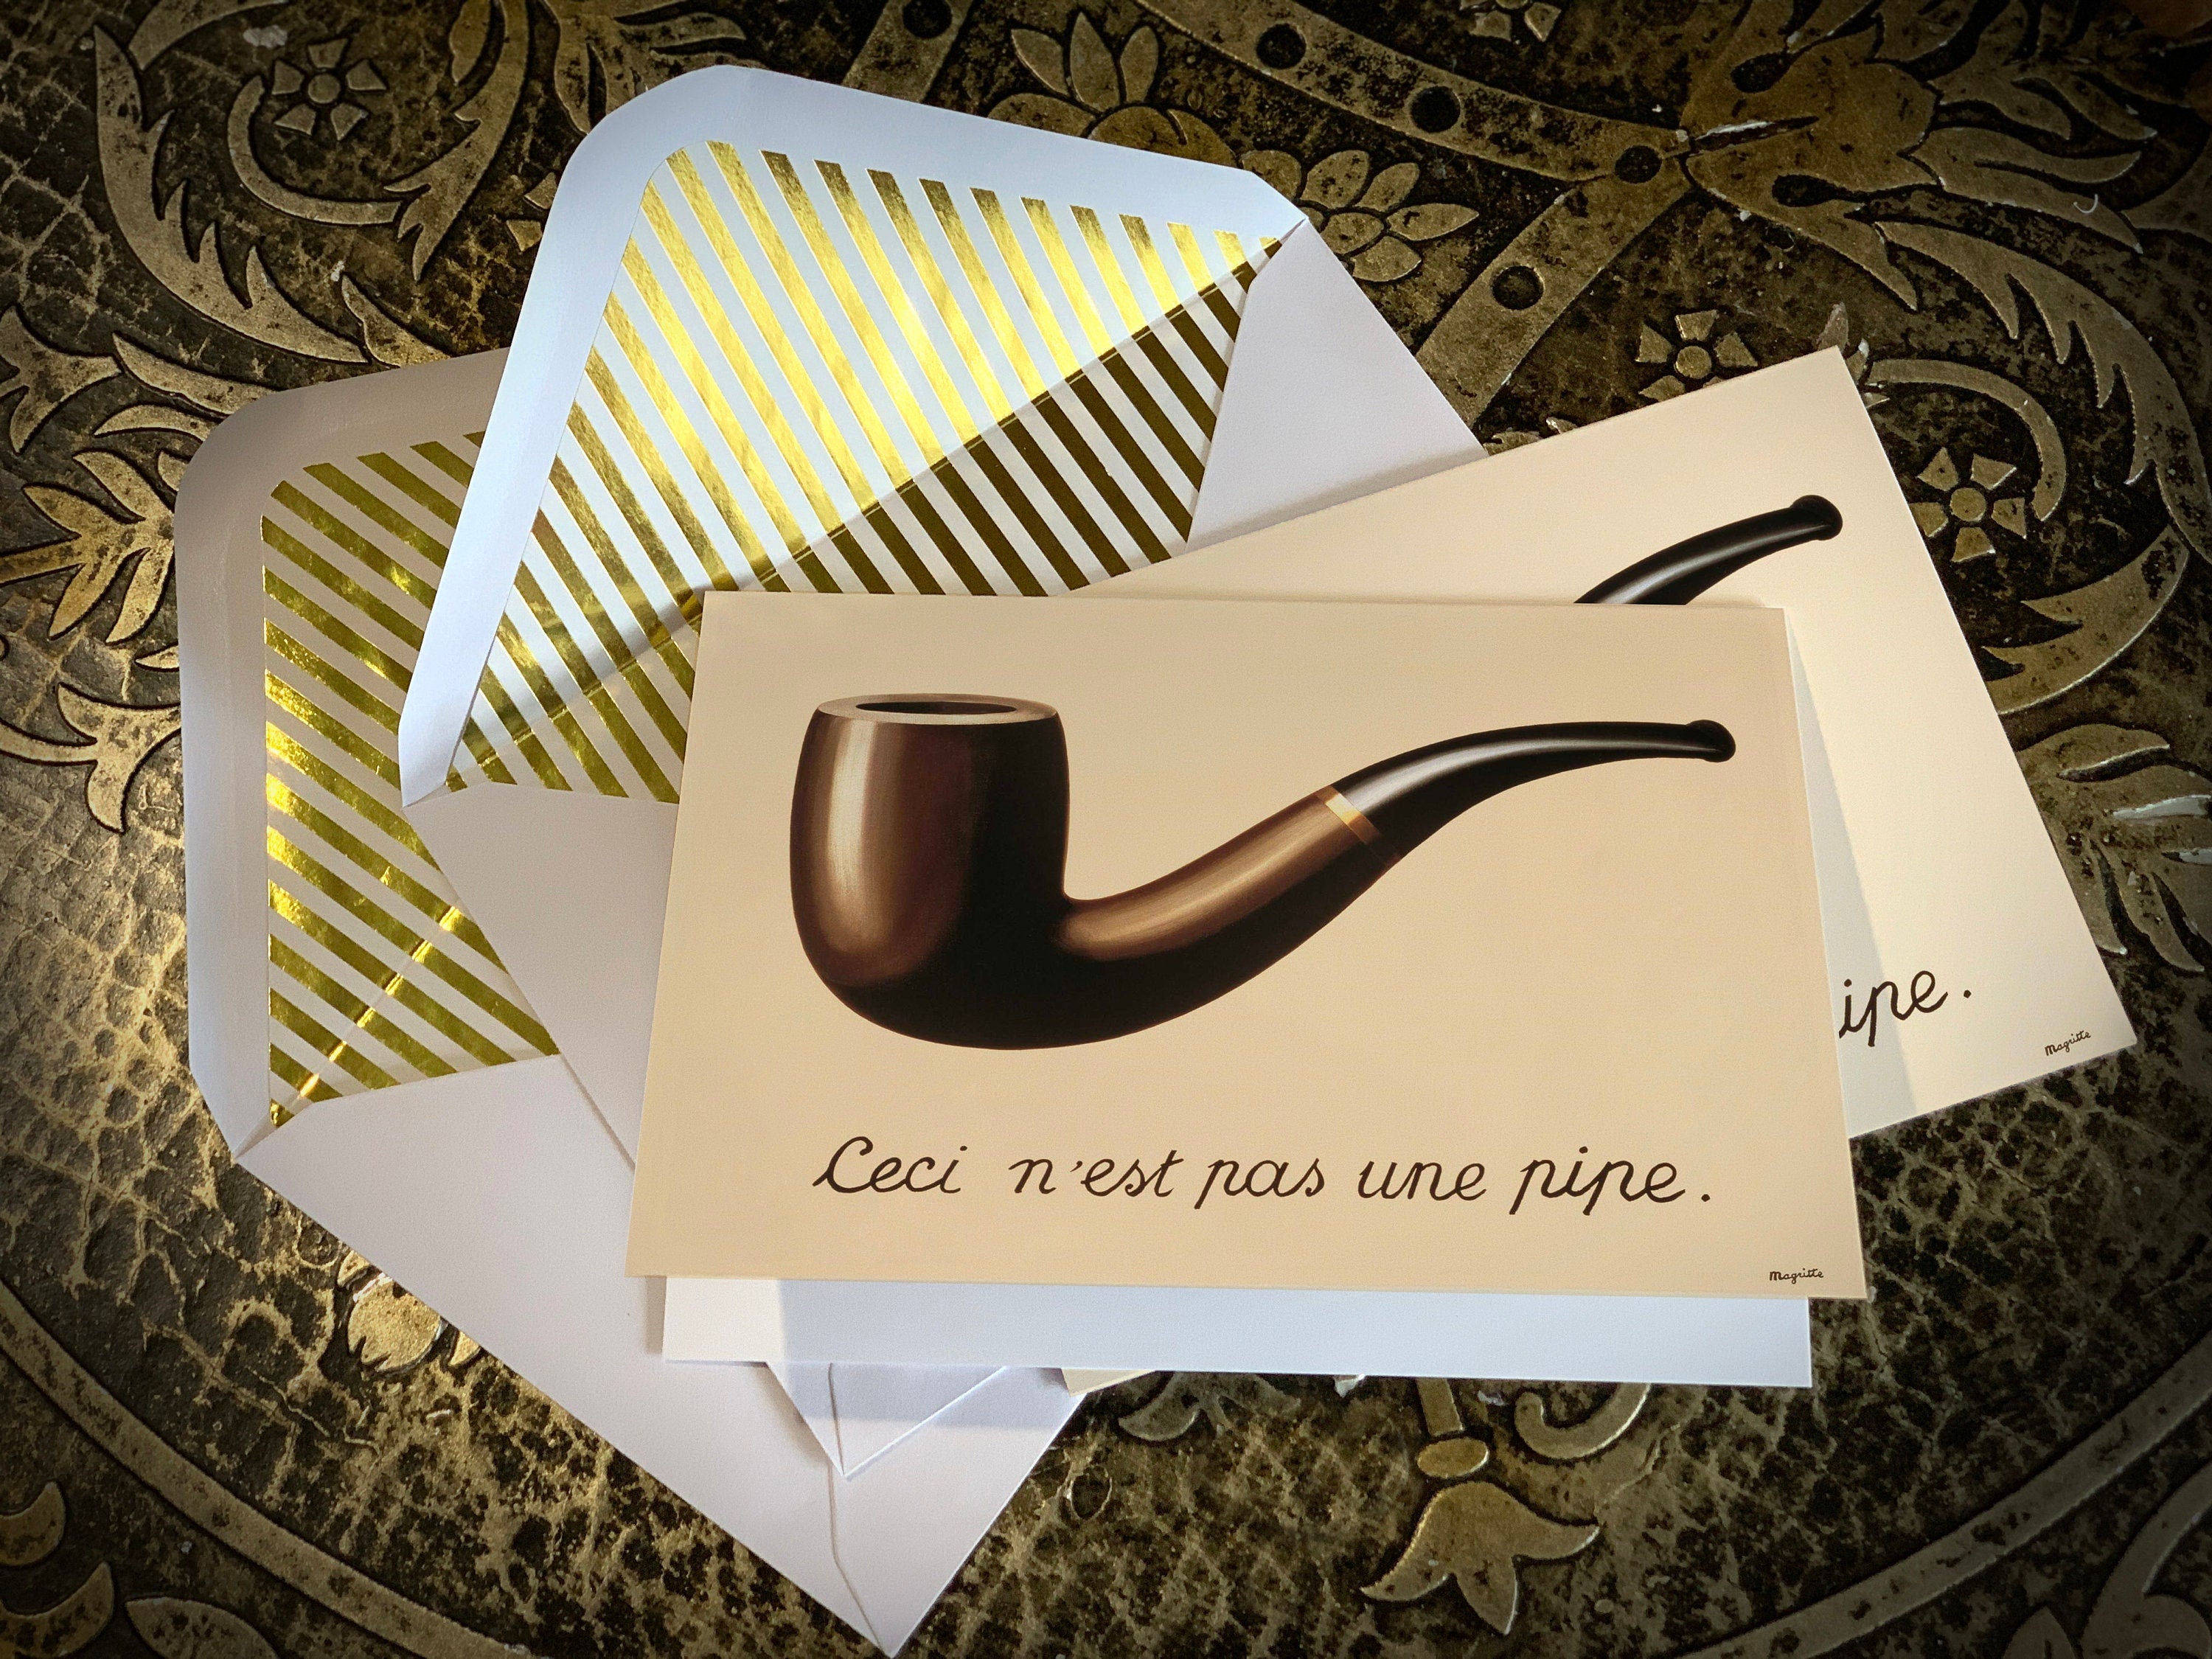 Ceci N'est Pas Une Pipe by Rene Magritte, Surrealist Greeting Card with Elegant Striped Gold Foil Envelope, 1 Card/Envelope